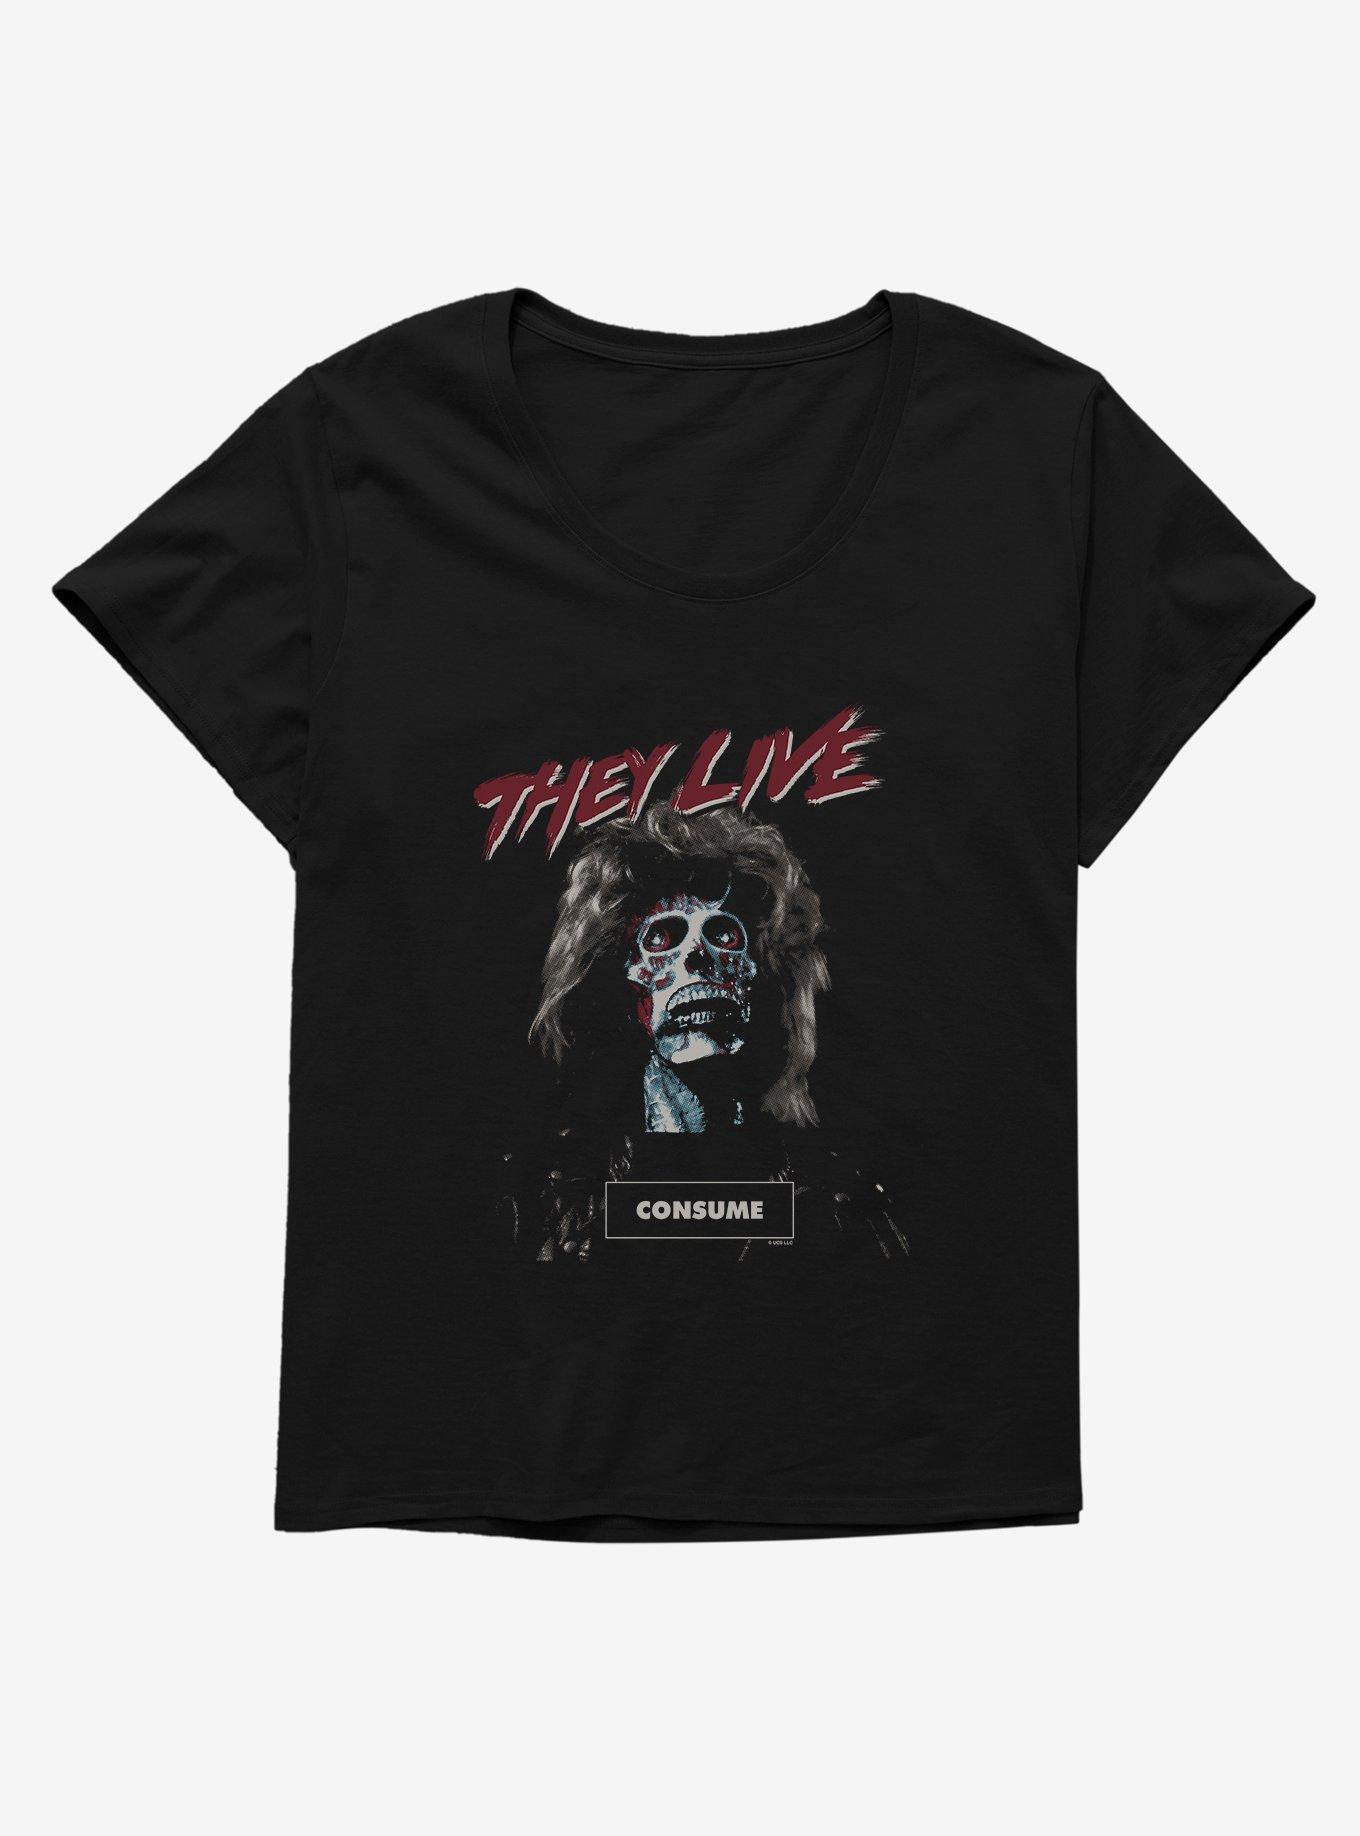 They Live Consume Girls T-Shirt Plus Size, BLACK, hi-res